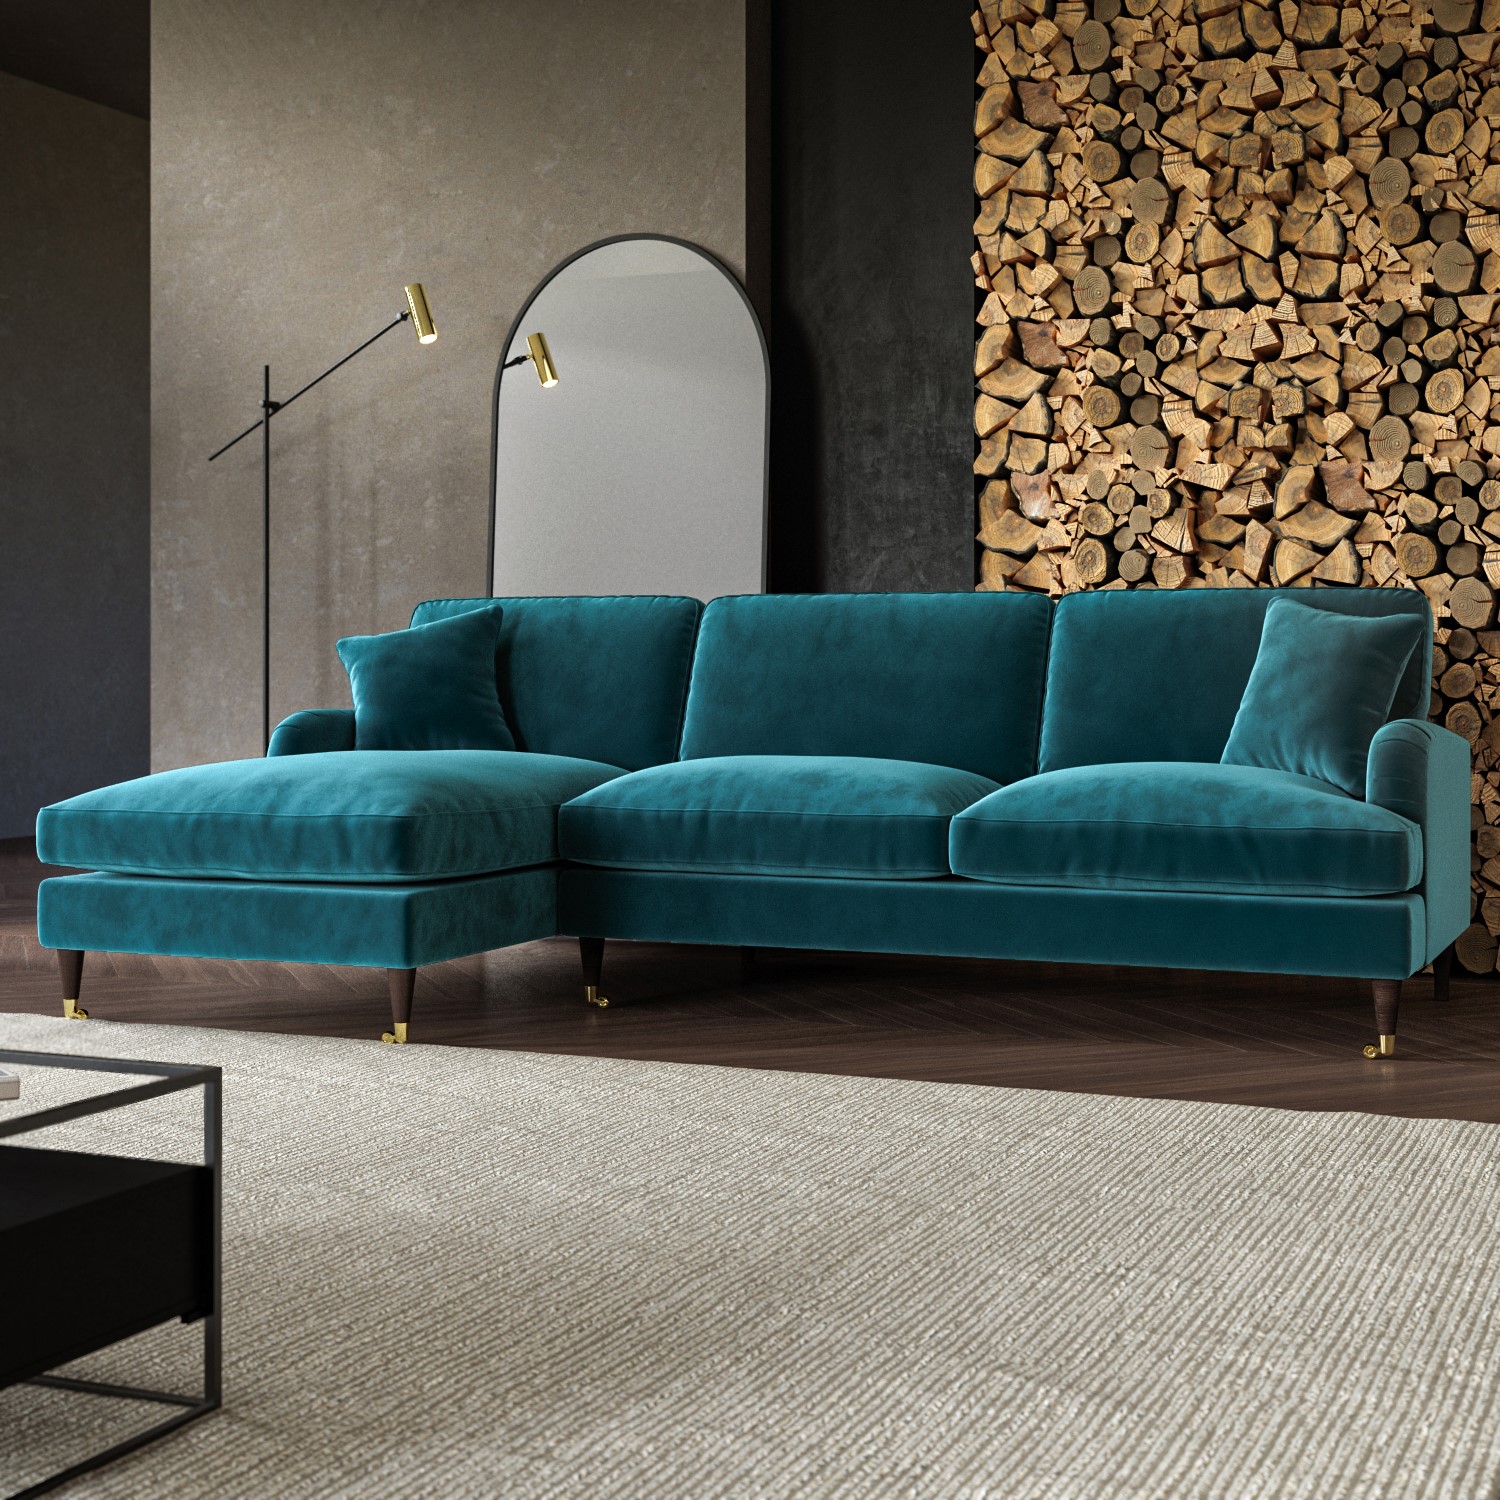 Read more about Teal velvet left hand facing l shaped sofa seats 4 payton